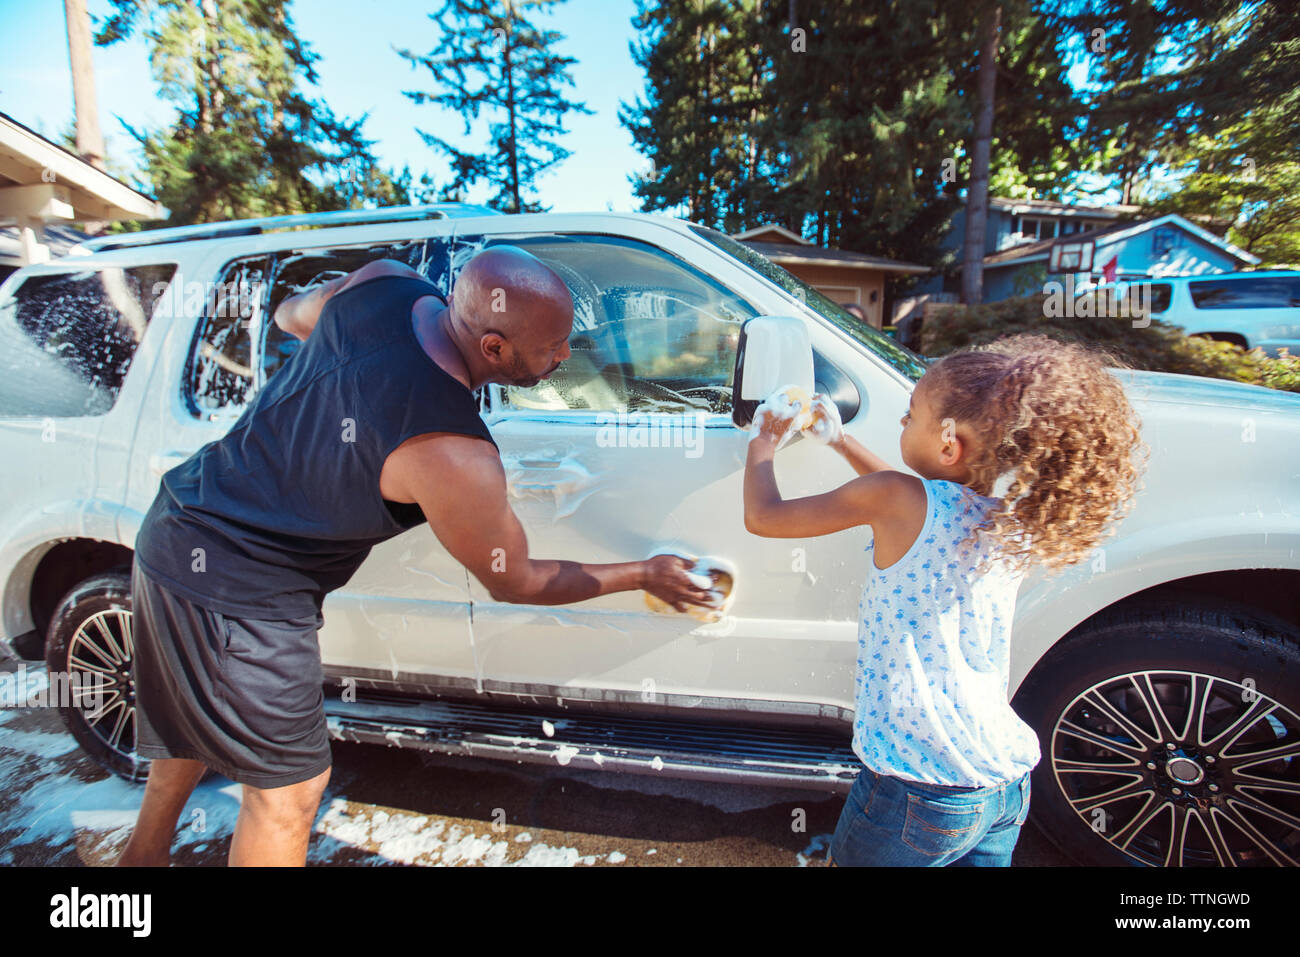 Father and daughter washing car in driveway Stock Photo